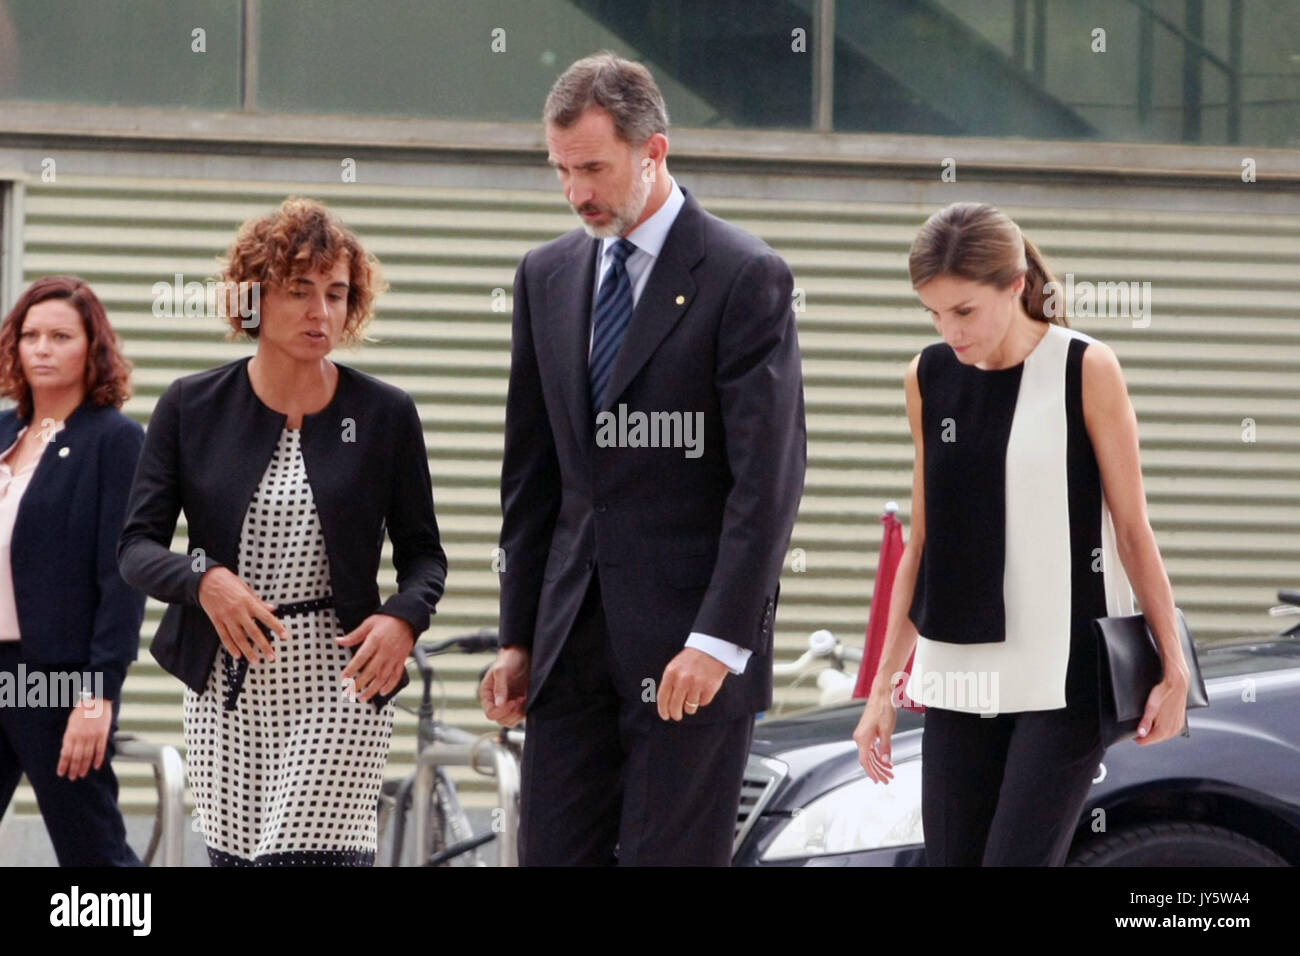 Barcelona, Spain. 19th Aug, 2017. Spanish Kings Felipe VI and Letizia Ortiz visit the staff medical in emergencies the second day after a car terrorist attack in Las Ramblas in Barcelona on Saturday on 19 August 2017. Credit: Gtres Información más Comuniación on line,S.L./Alamy Live News Stock Photo